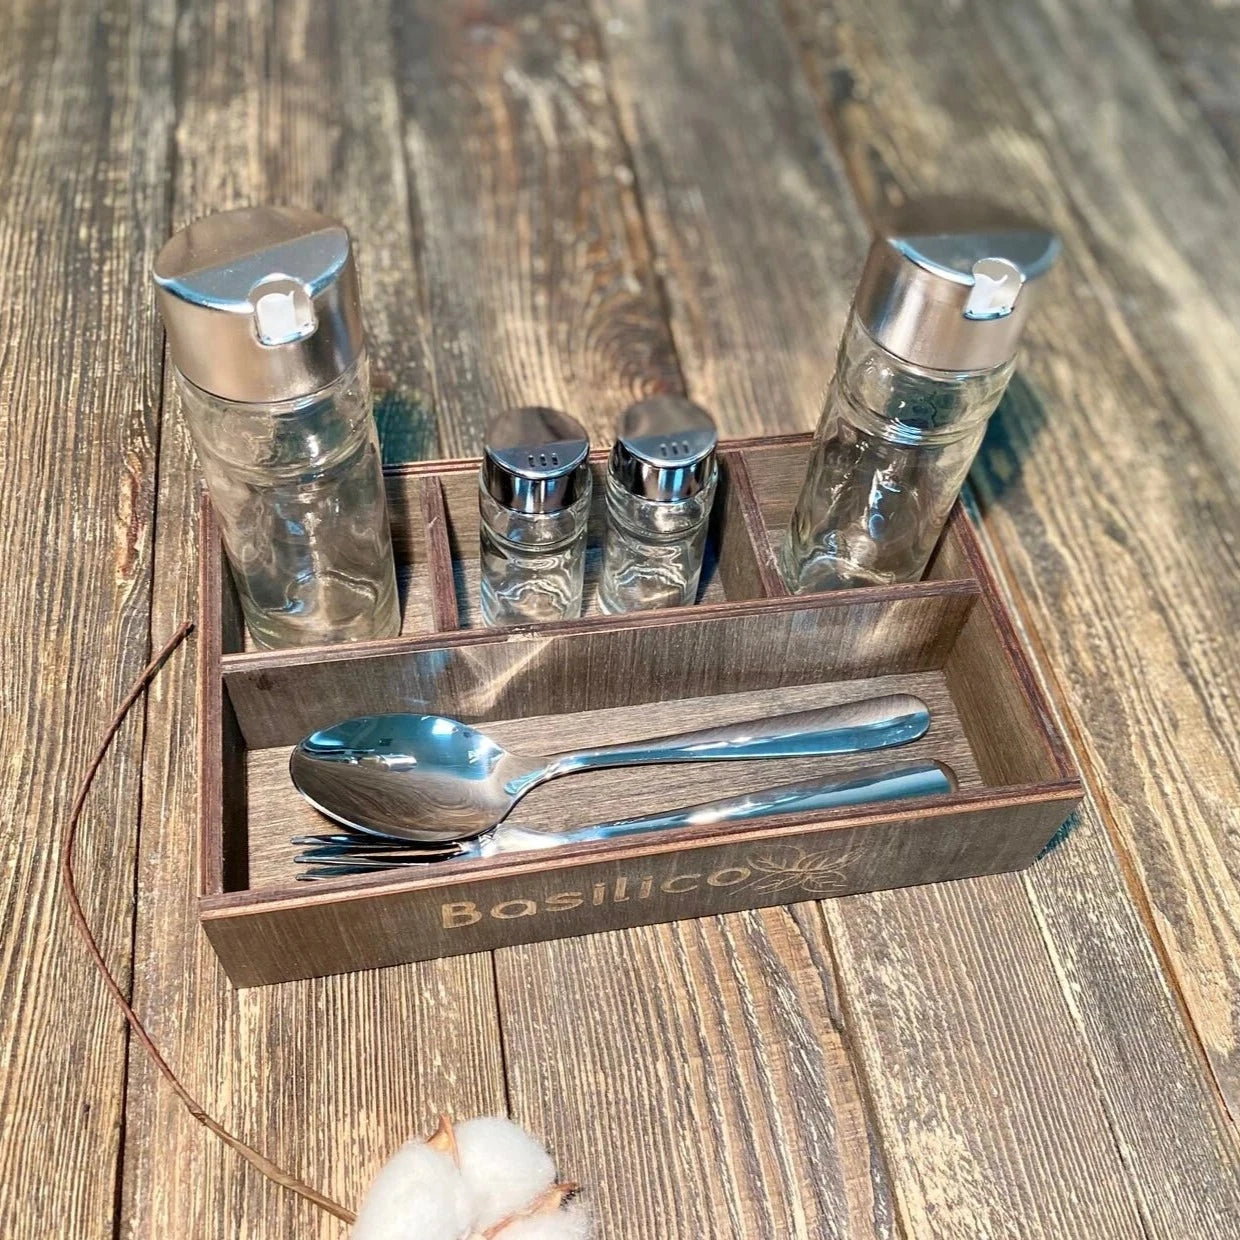 Wooden Holder for Condiments, Napkins, and Cutlery